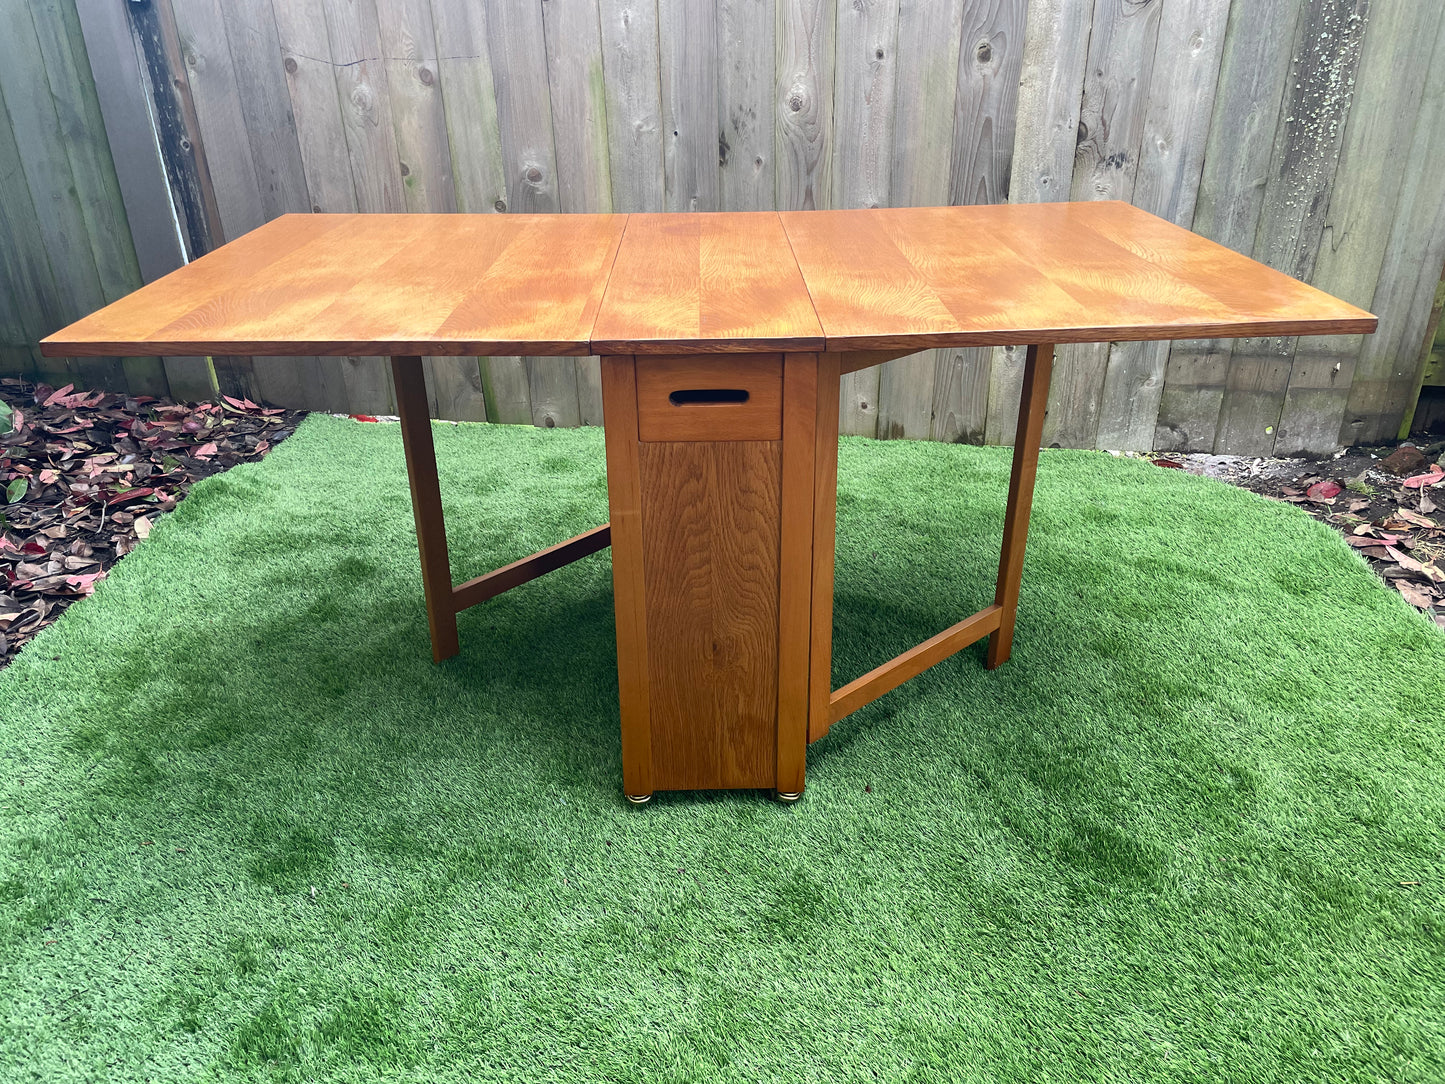 Mid Century Modern Gateleg Drop Leaf Dining Table on Casters With Folding Chairs - 5 Pieces